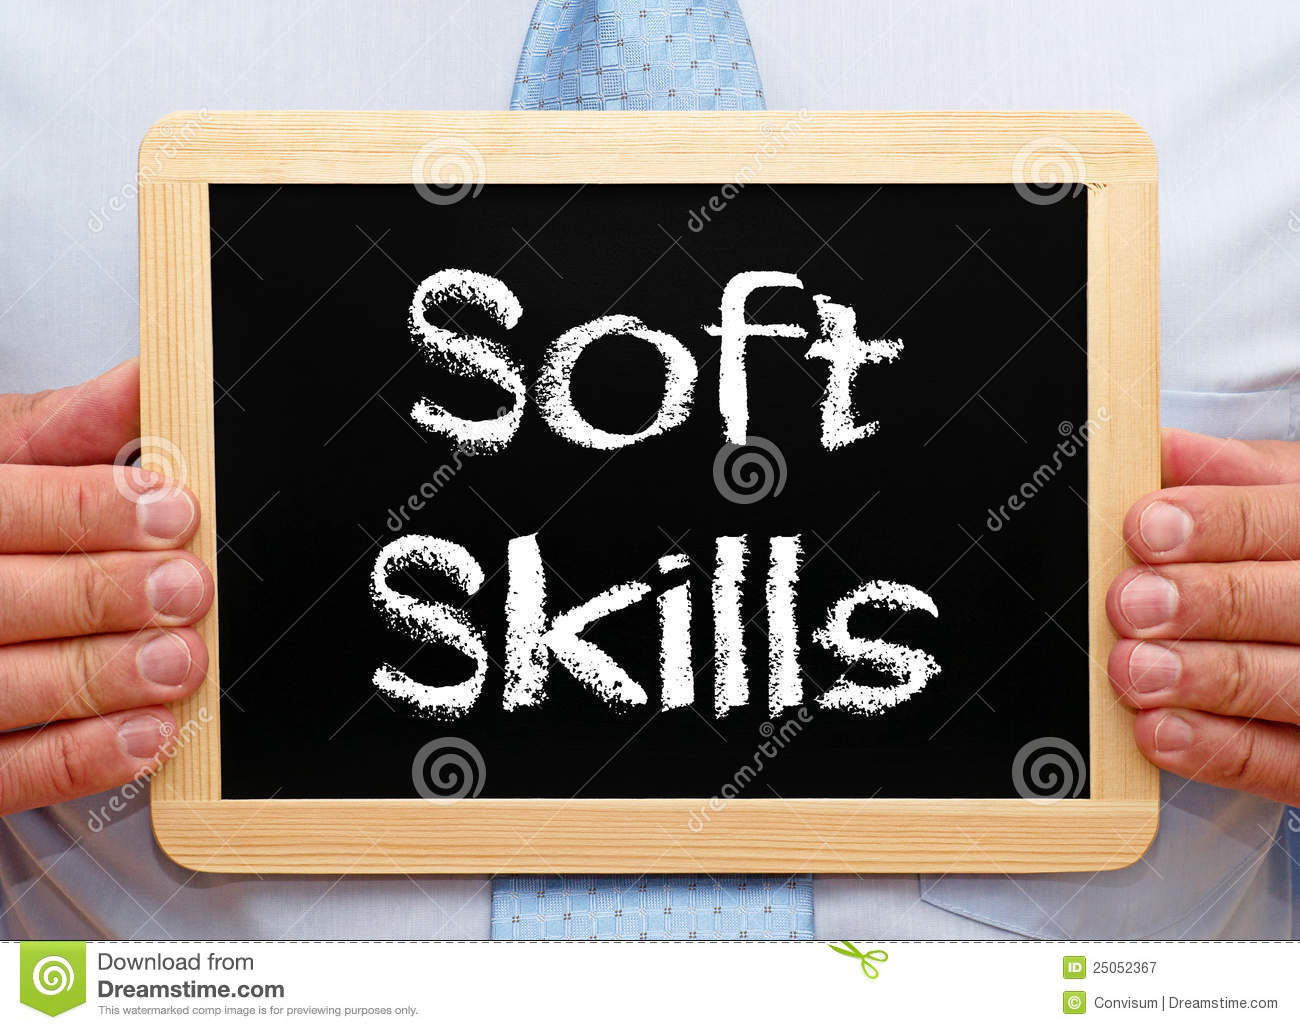 Soft Skills Chalboard Royalty Free Stock Photography   Image  25052367